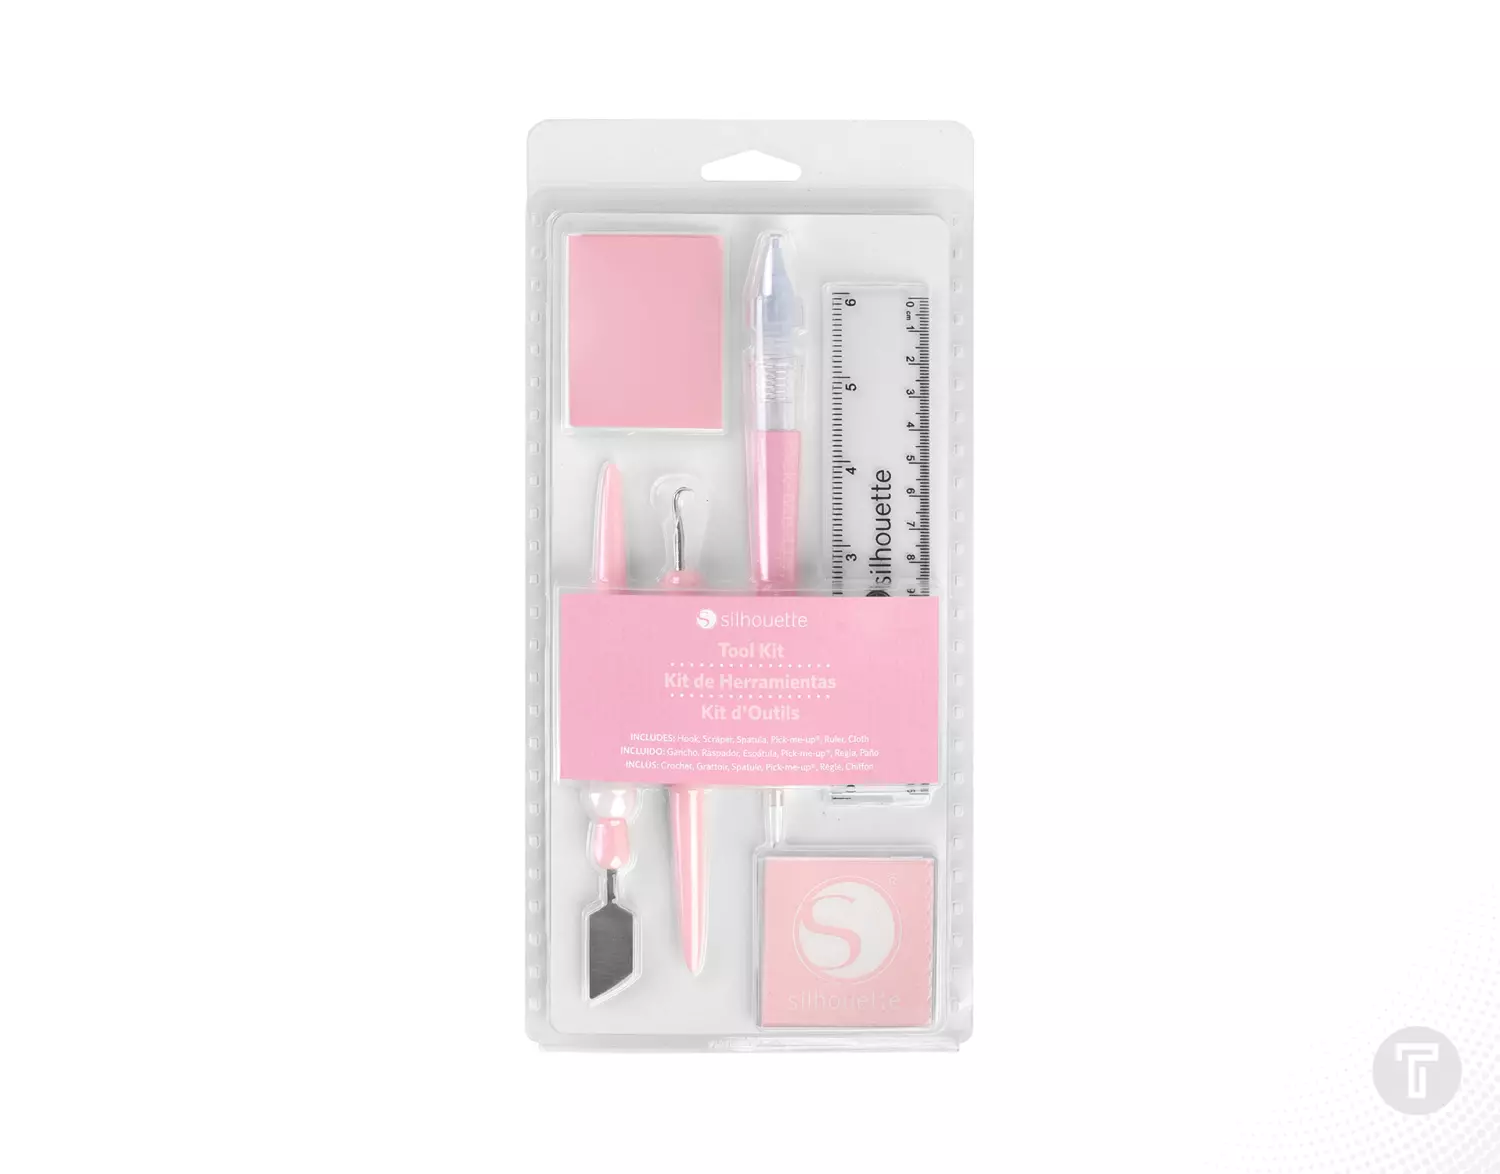 Silhouette toolkit pink